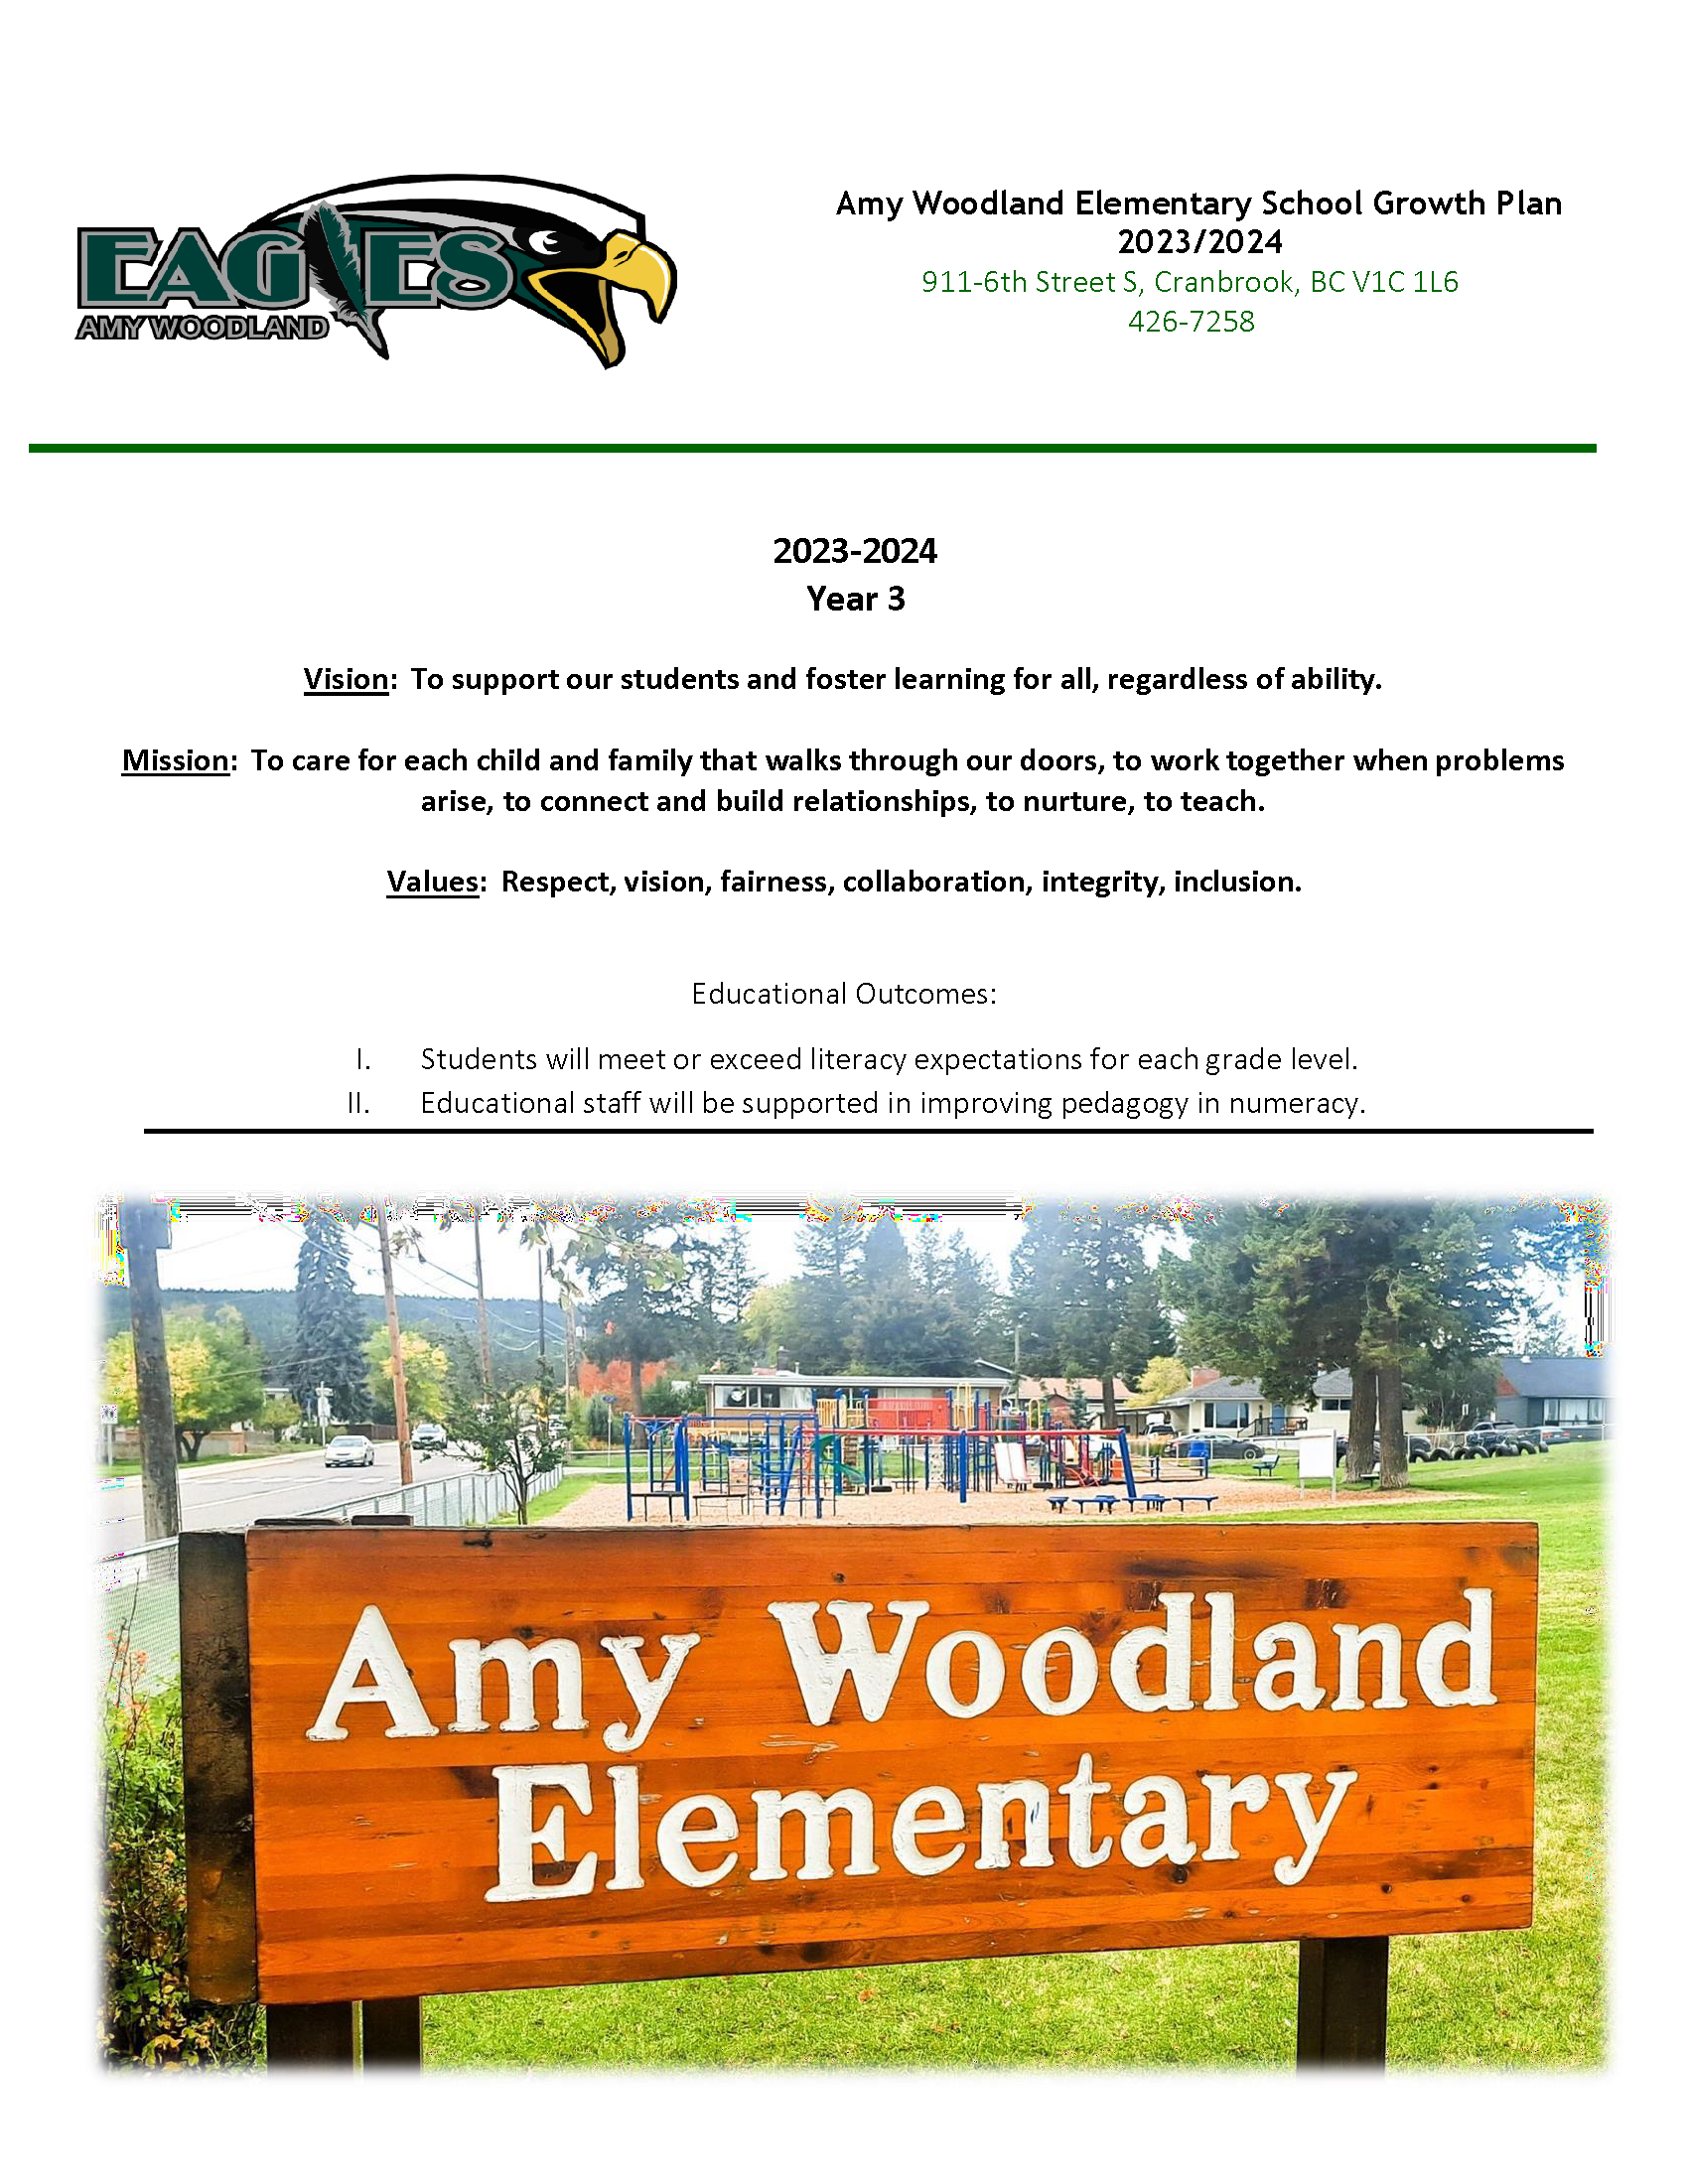 Amy Woodland Elementary School Growth Plan 2023.2024 Final_Page_01.png